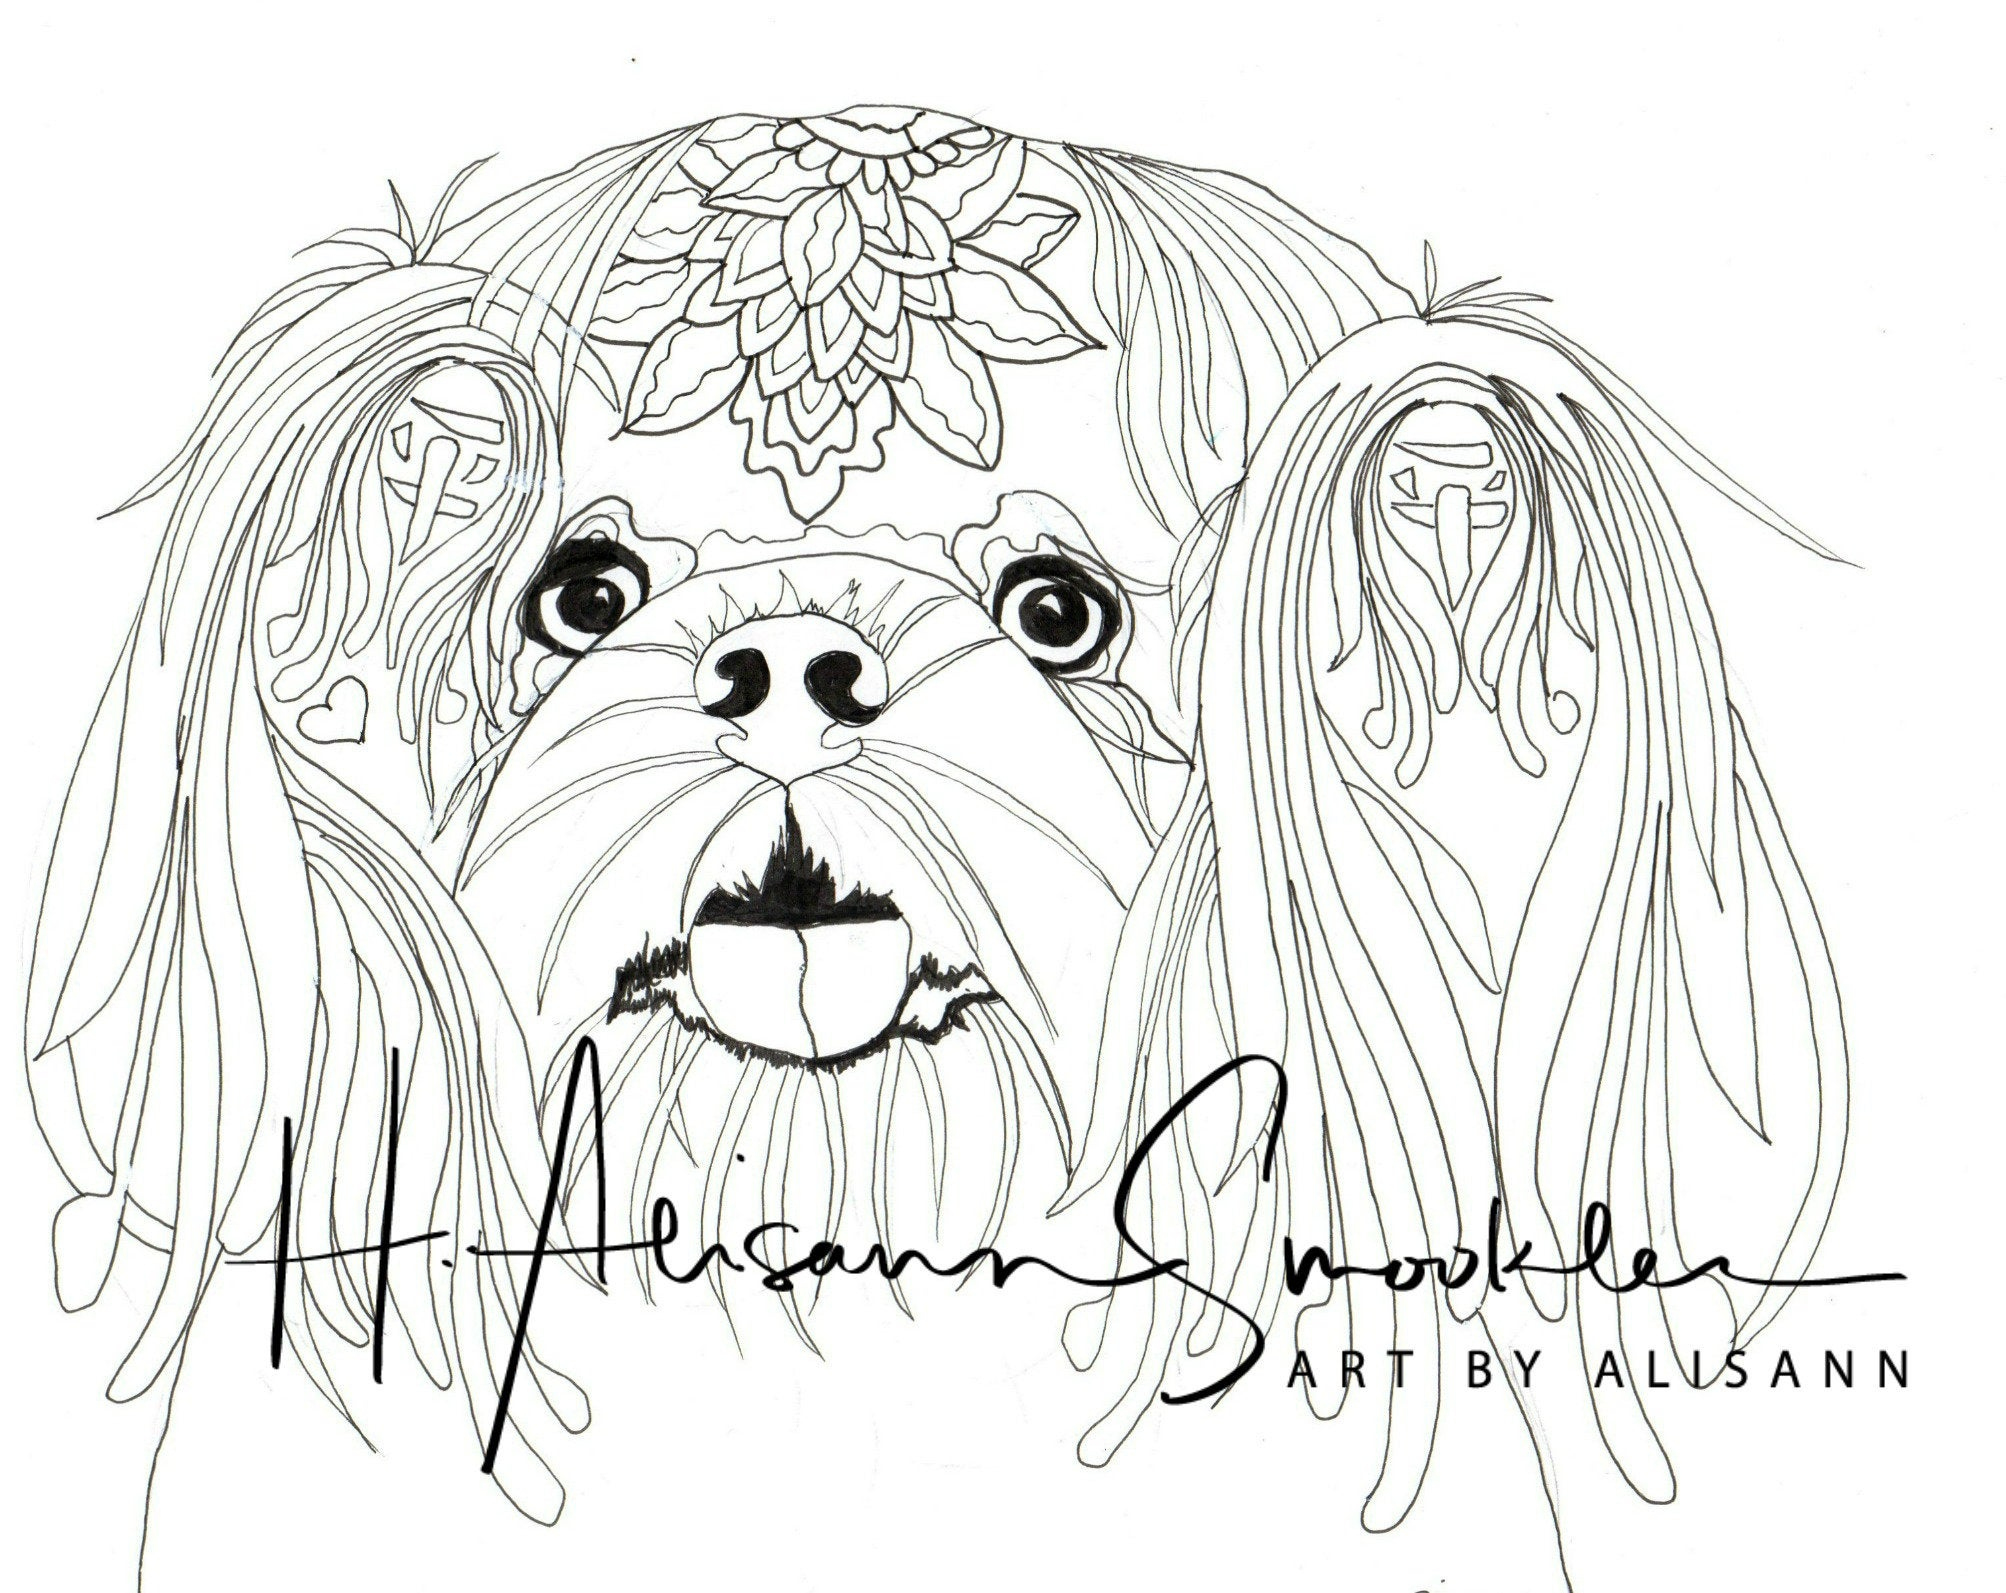 Shih Tzu Puppies Coloring Pages Shih Tzu Instant Download Coloring Books For Adults Love Dogs